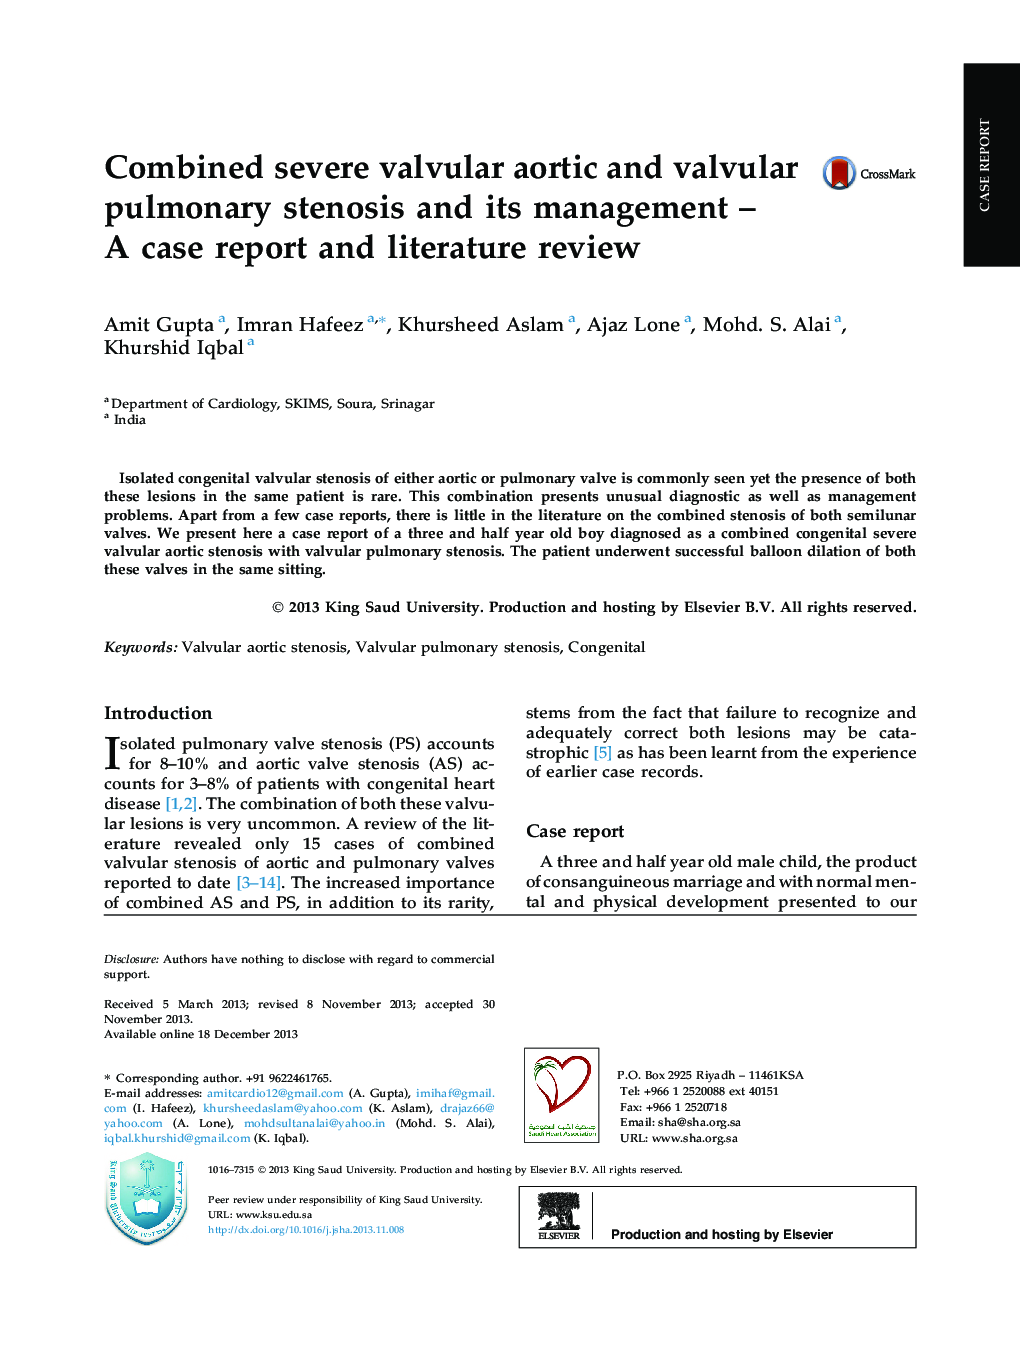 Combined severe valvular aortic and valvular pulmonary stenosis and its management – A case report and literature review 